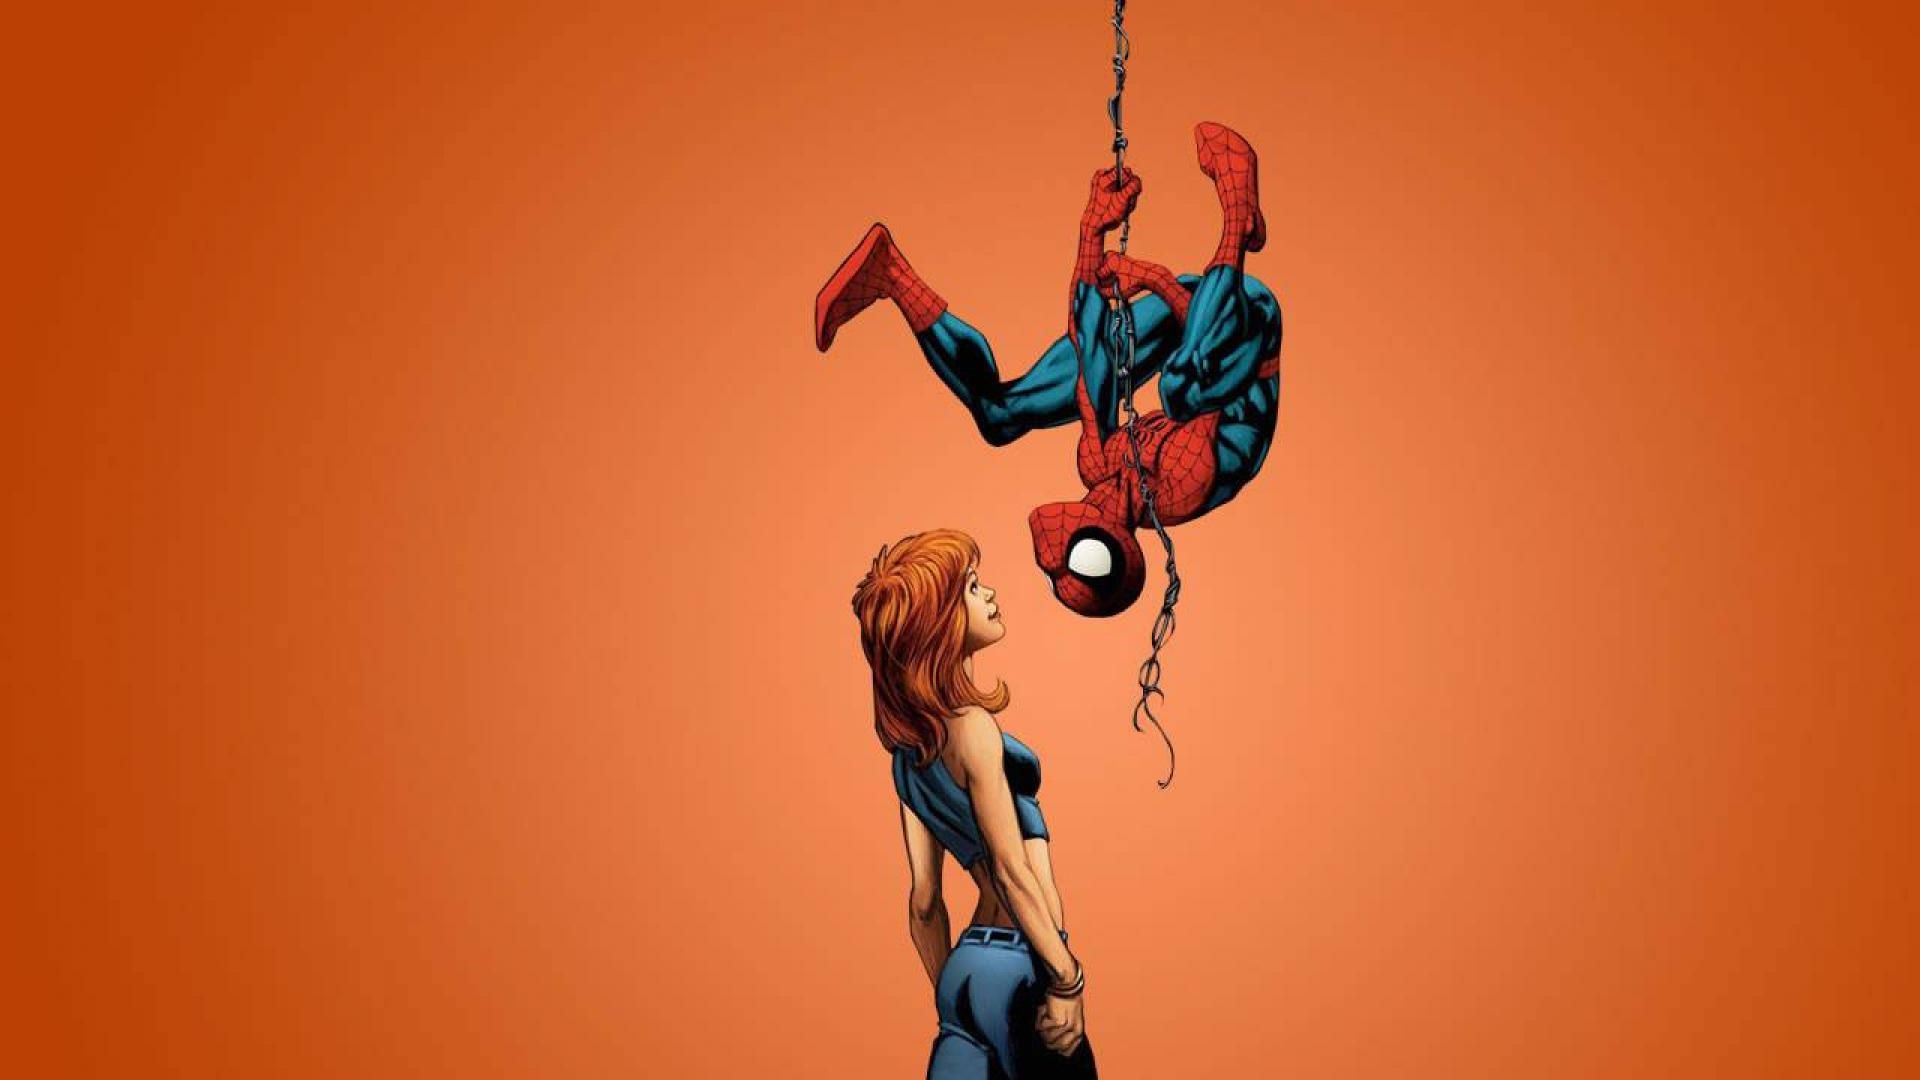 Spiderman wallpaper [14] - Quality and Resolution